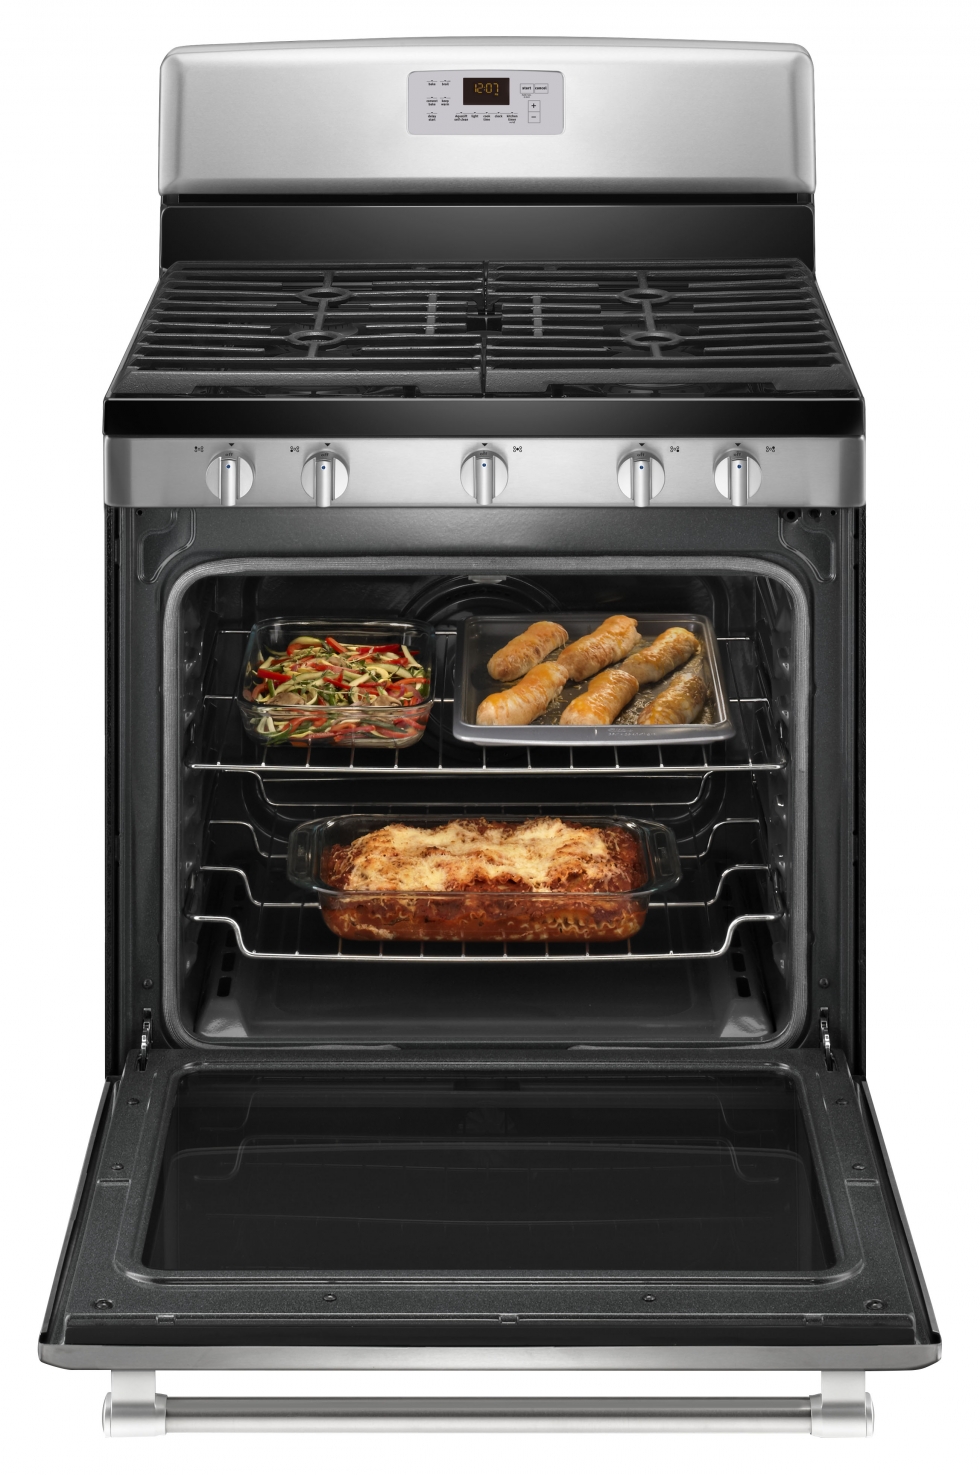 Maytag GAS RANGE WITH CONVECTION OVEN Stainless